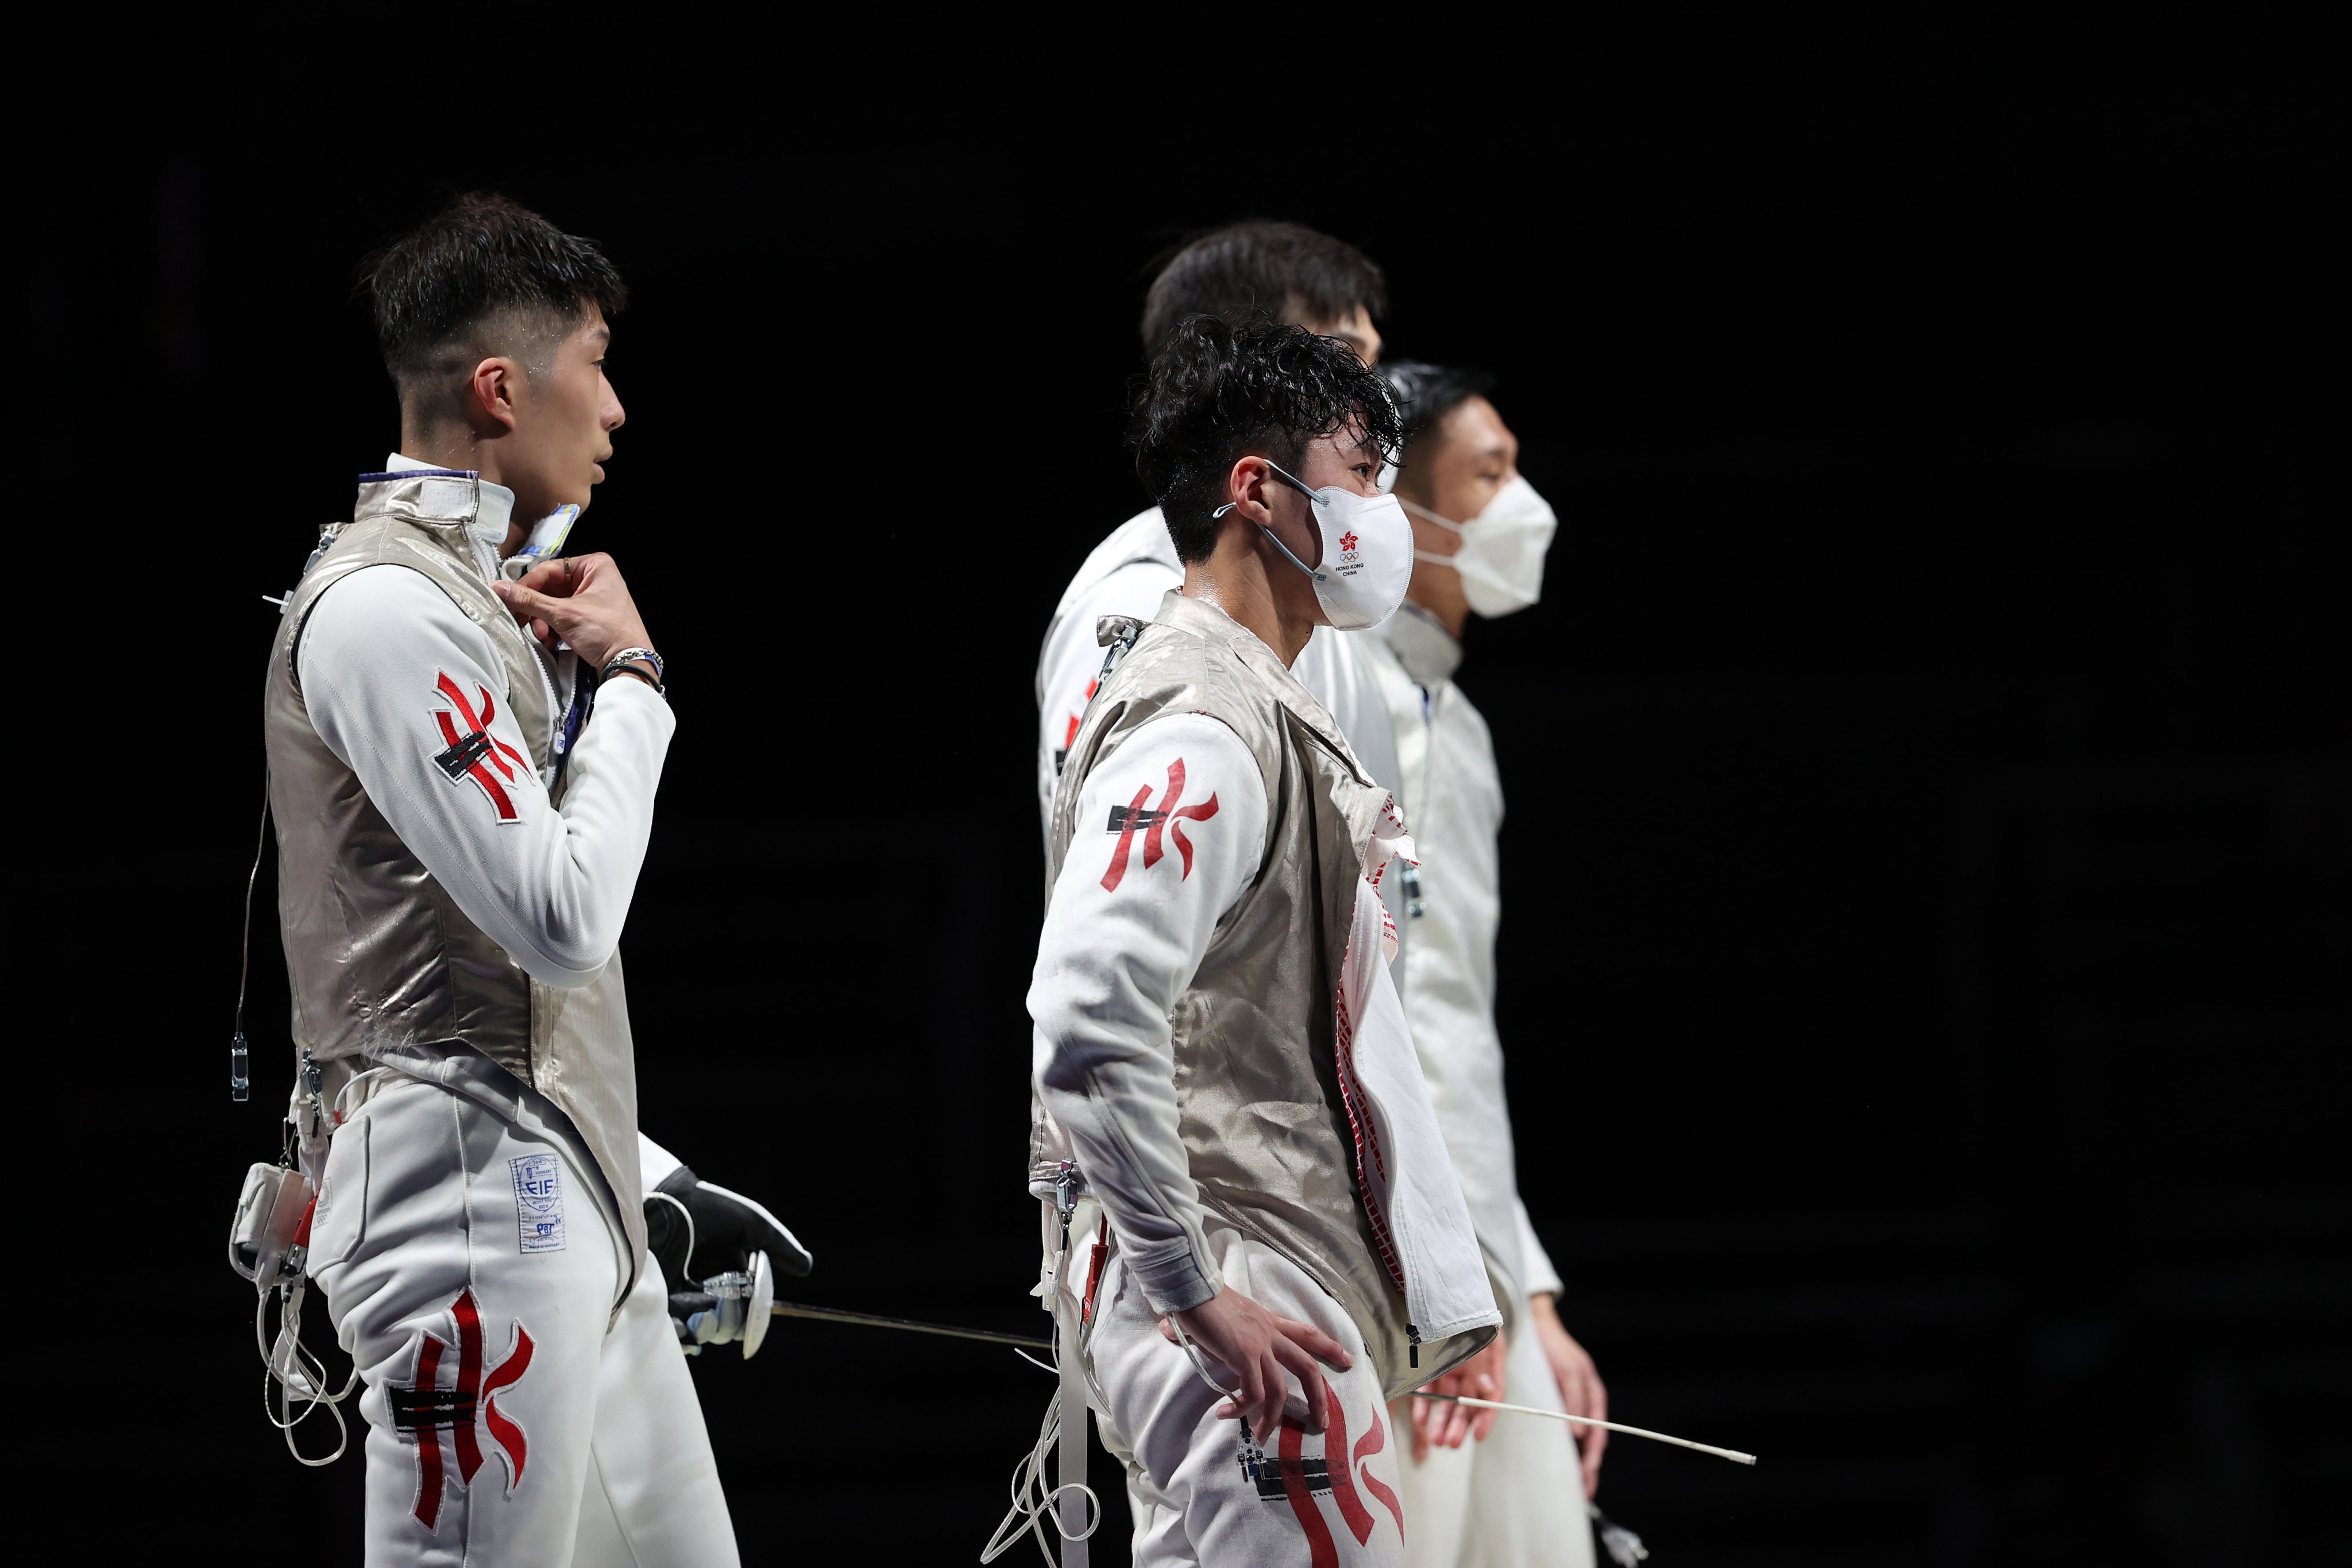 Hong Kong reacts after their loss to Team ROC in the men’s foil team quarter-finals at the 2020 Tokyo Olympic Games. Photo: Getty Images